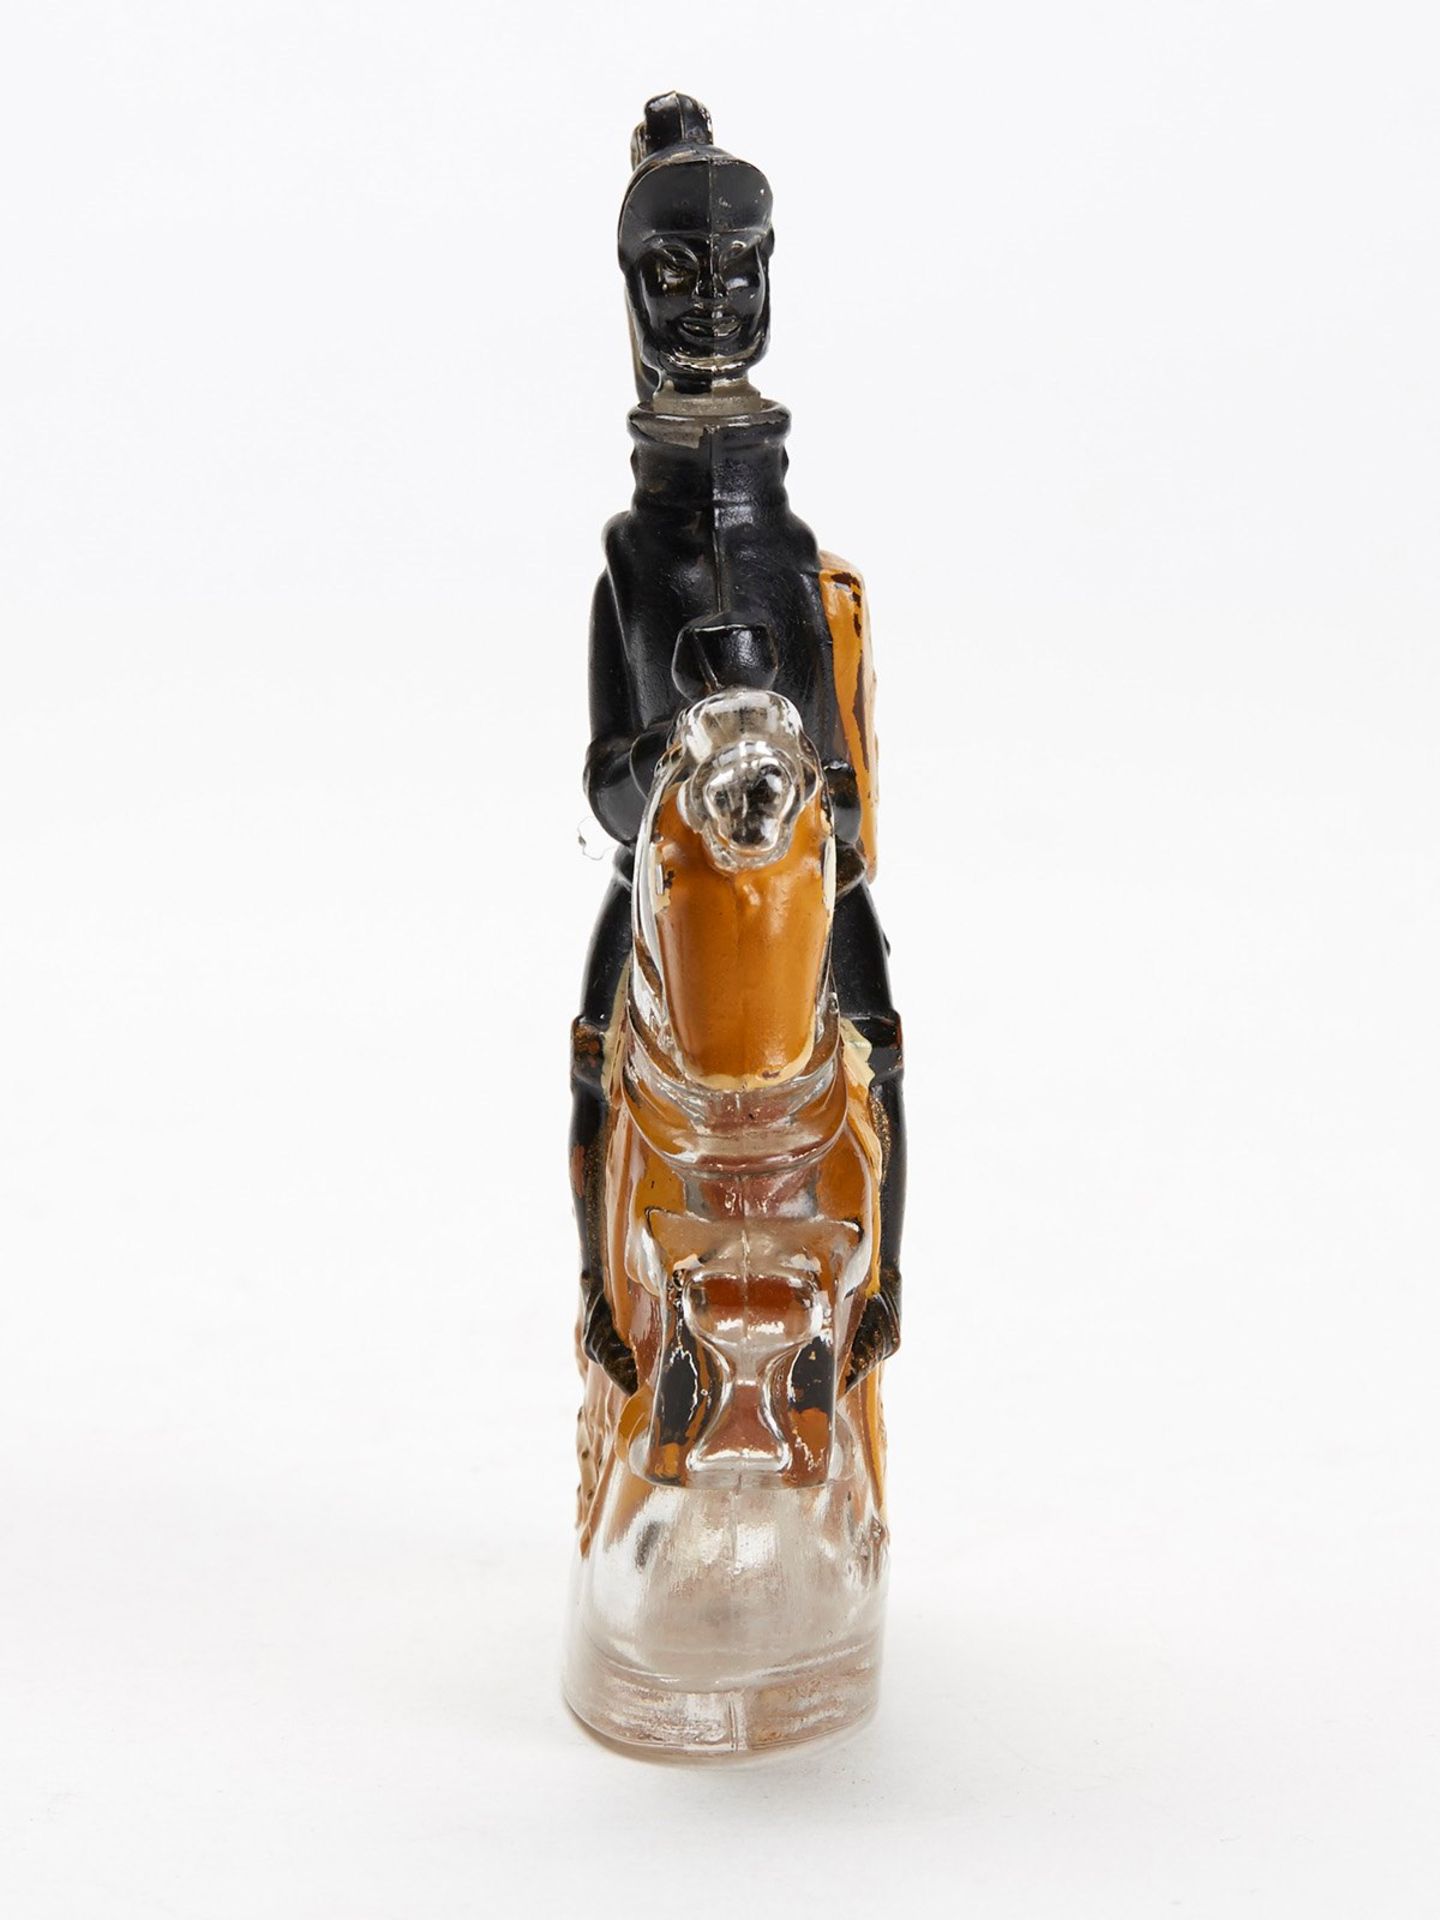 TWO ART DECO NOVELTY GLASS SCENT BOTTLES c.1920/30 - Image 5 of 10